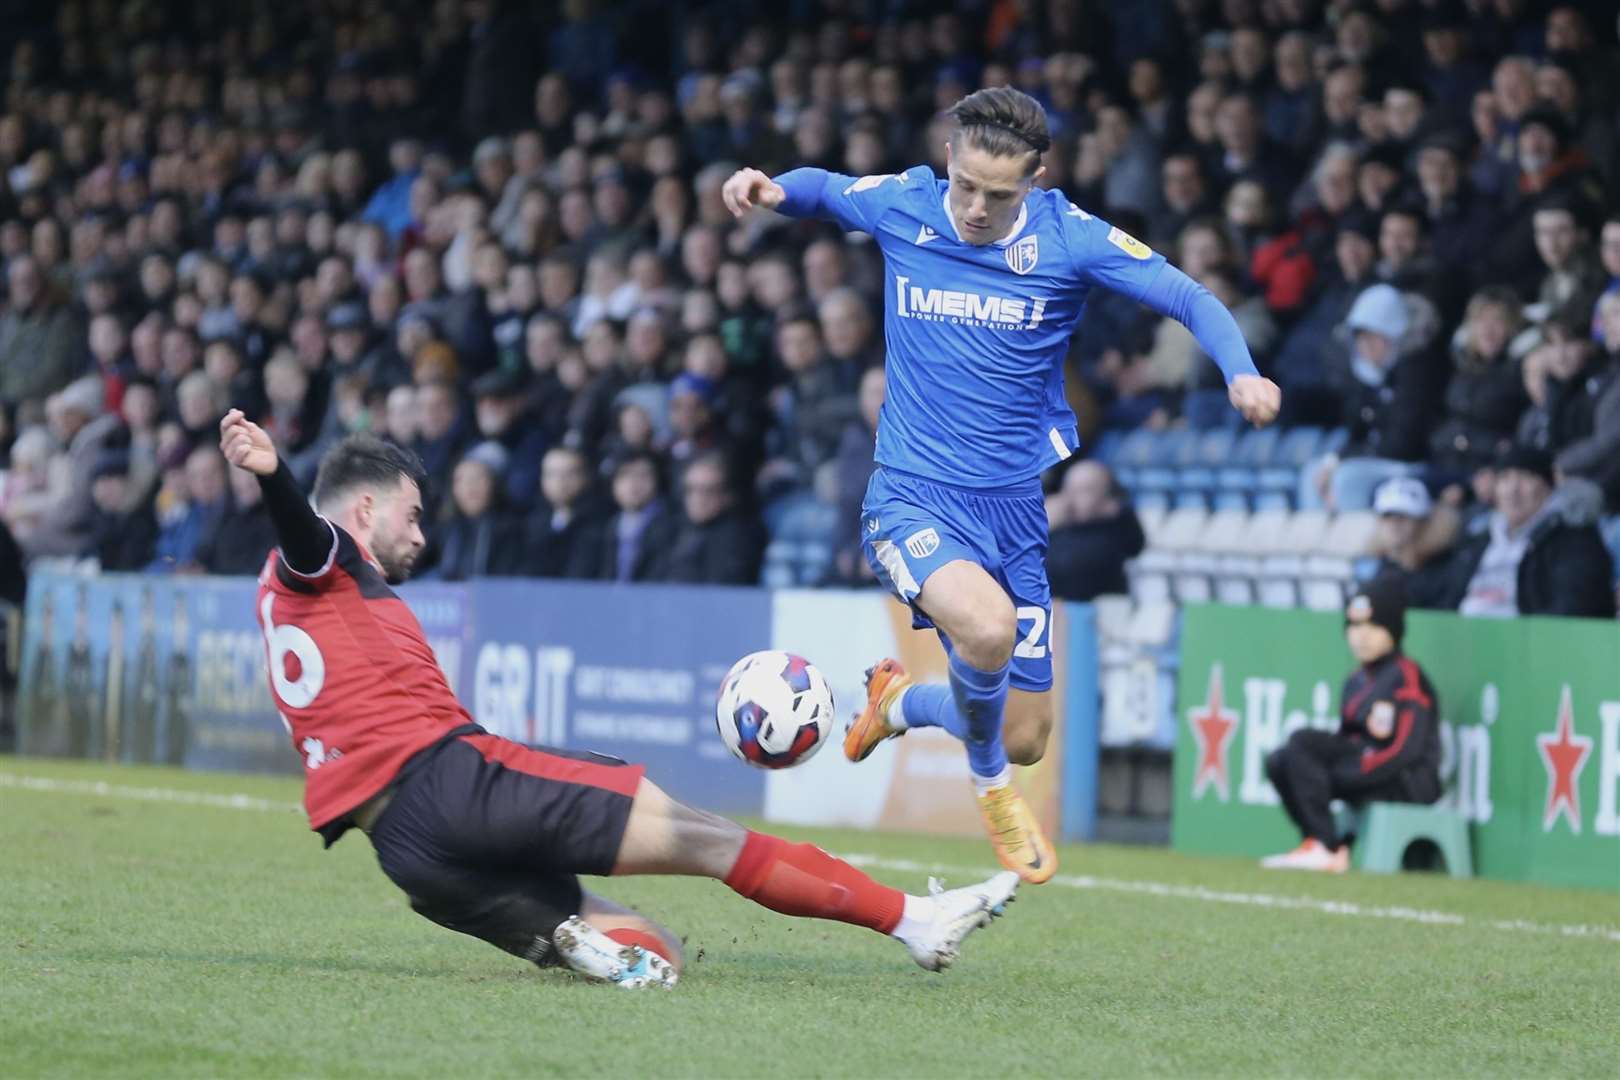 Newcomer Tom Nichols on the attack for Gillingham against Hartlepool United